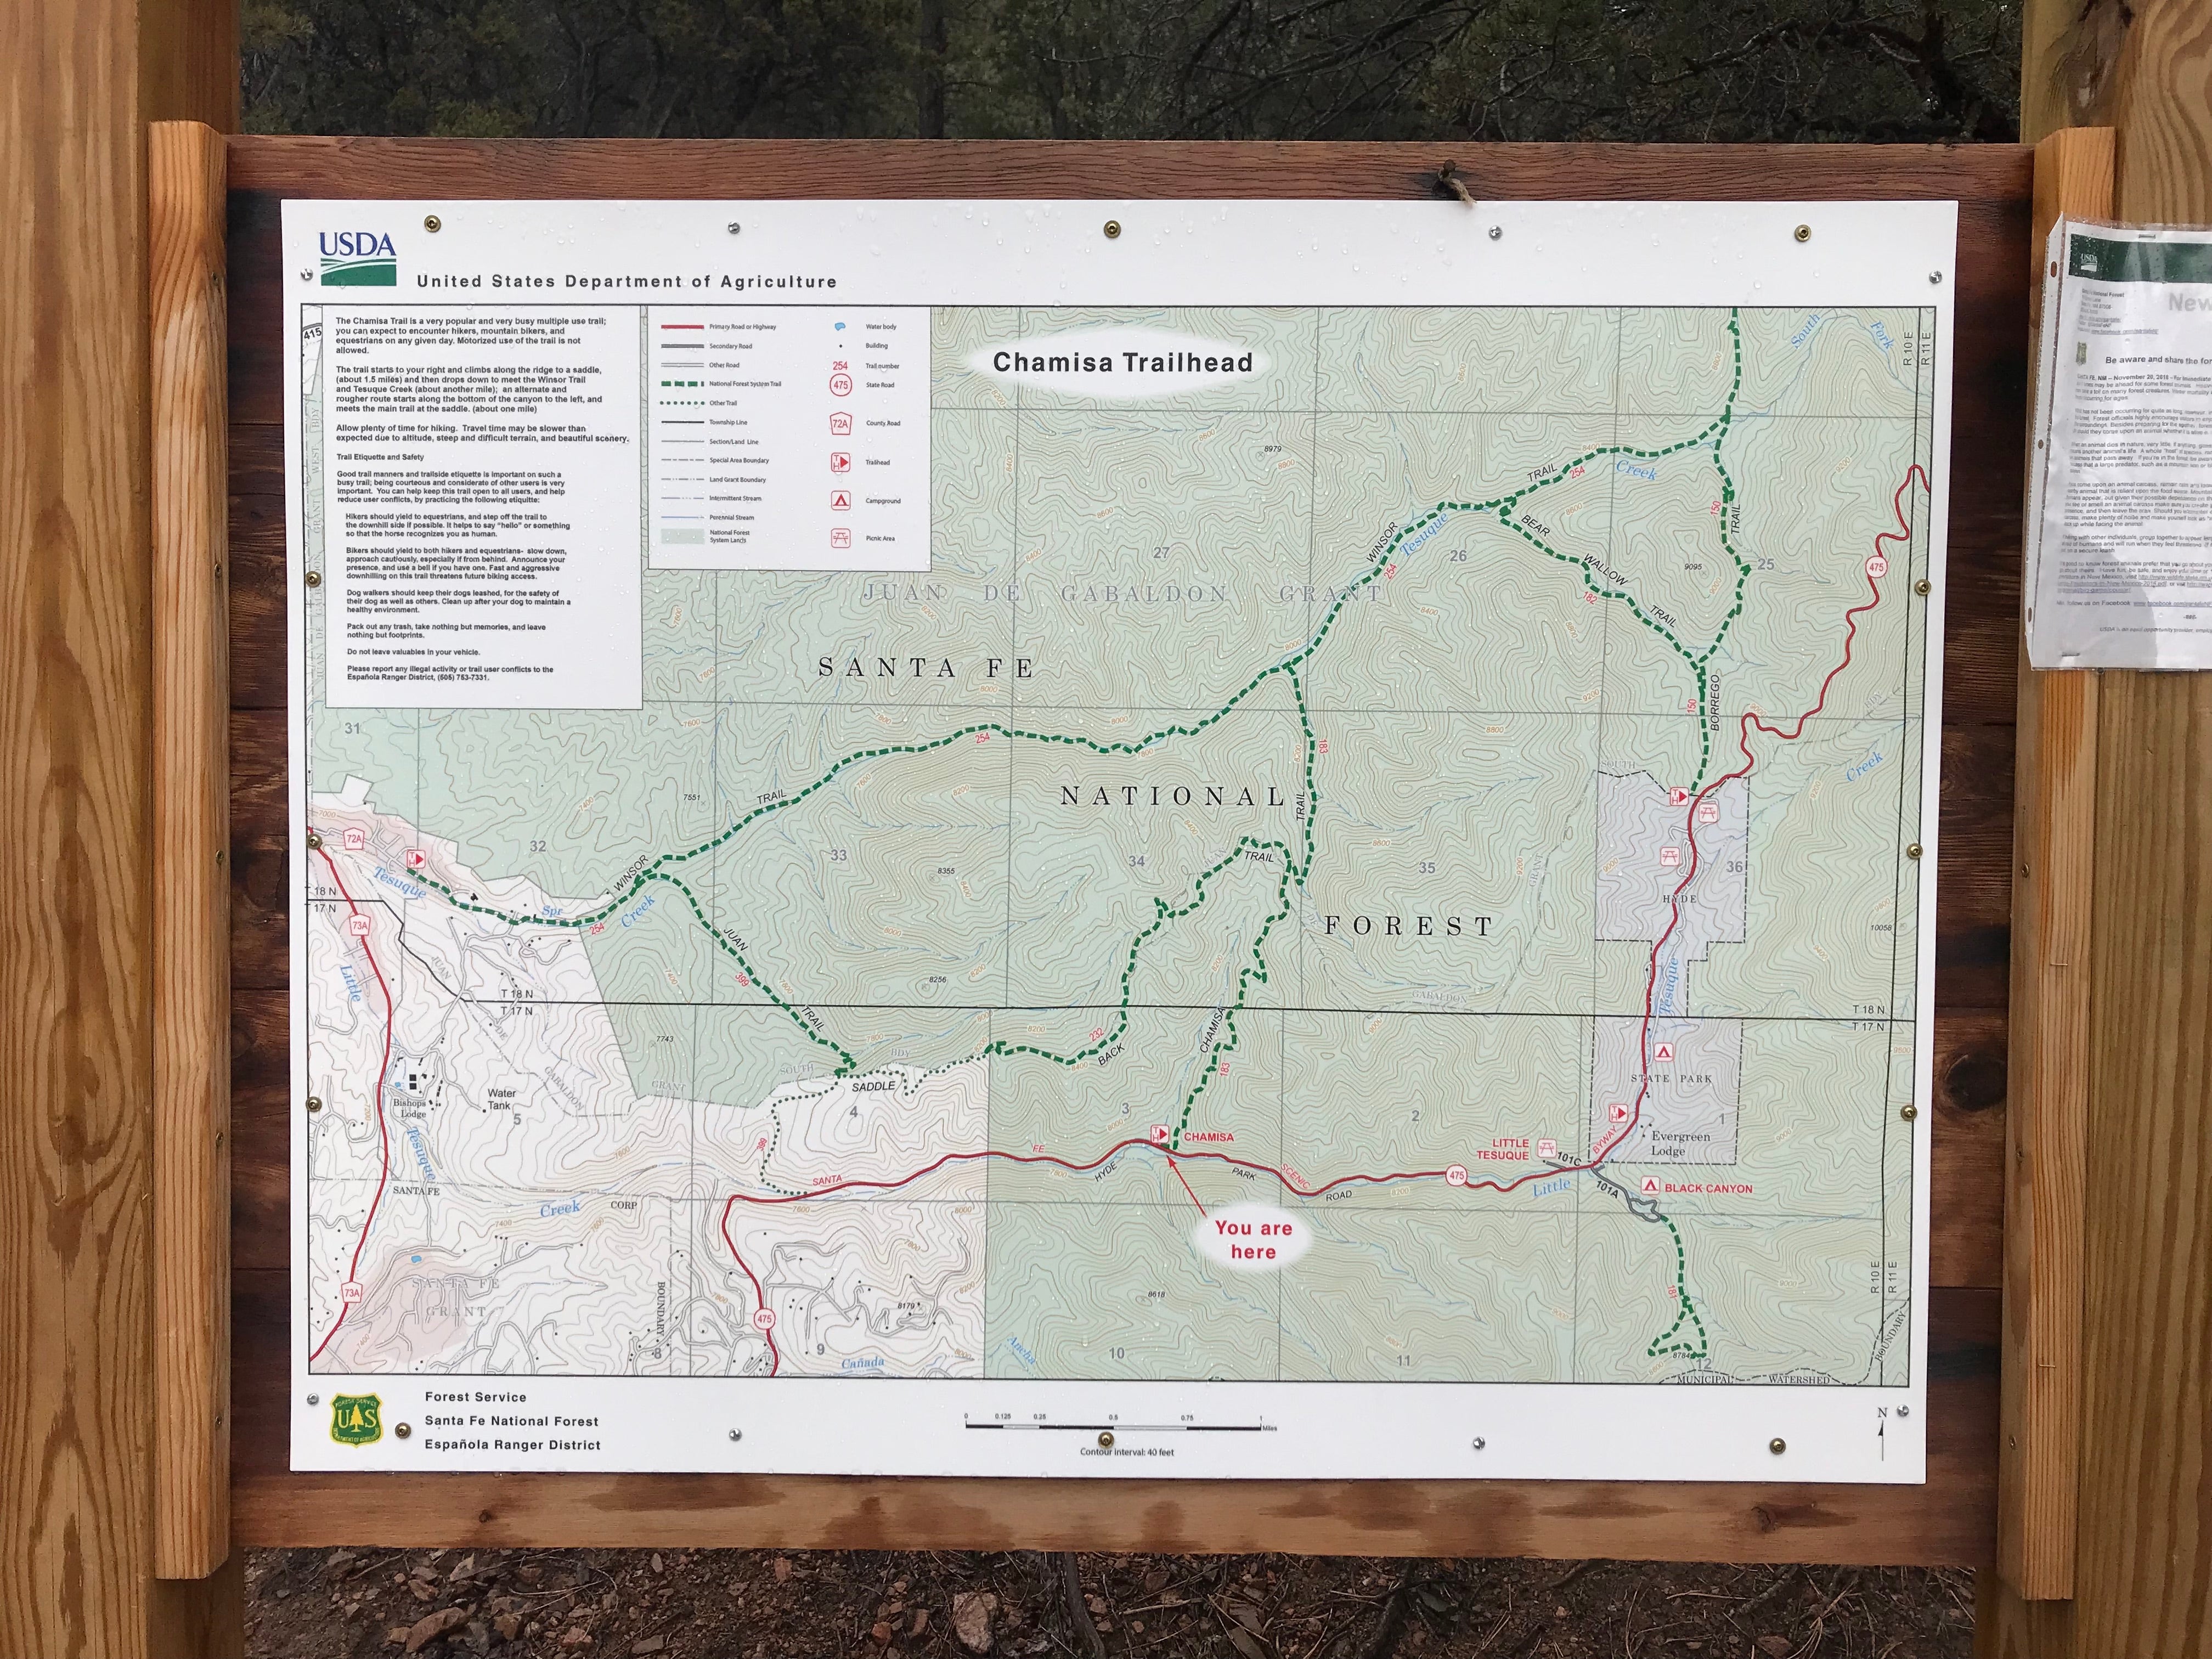 This area is a part of the very large trail system which runs through much of New Mexico, you can find this map as you enter the National Forest for more information